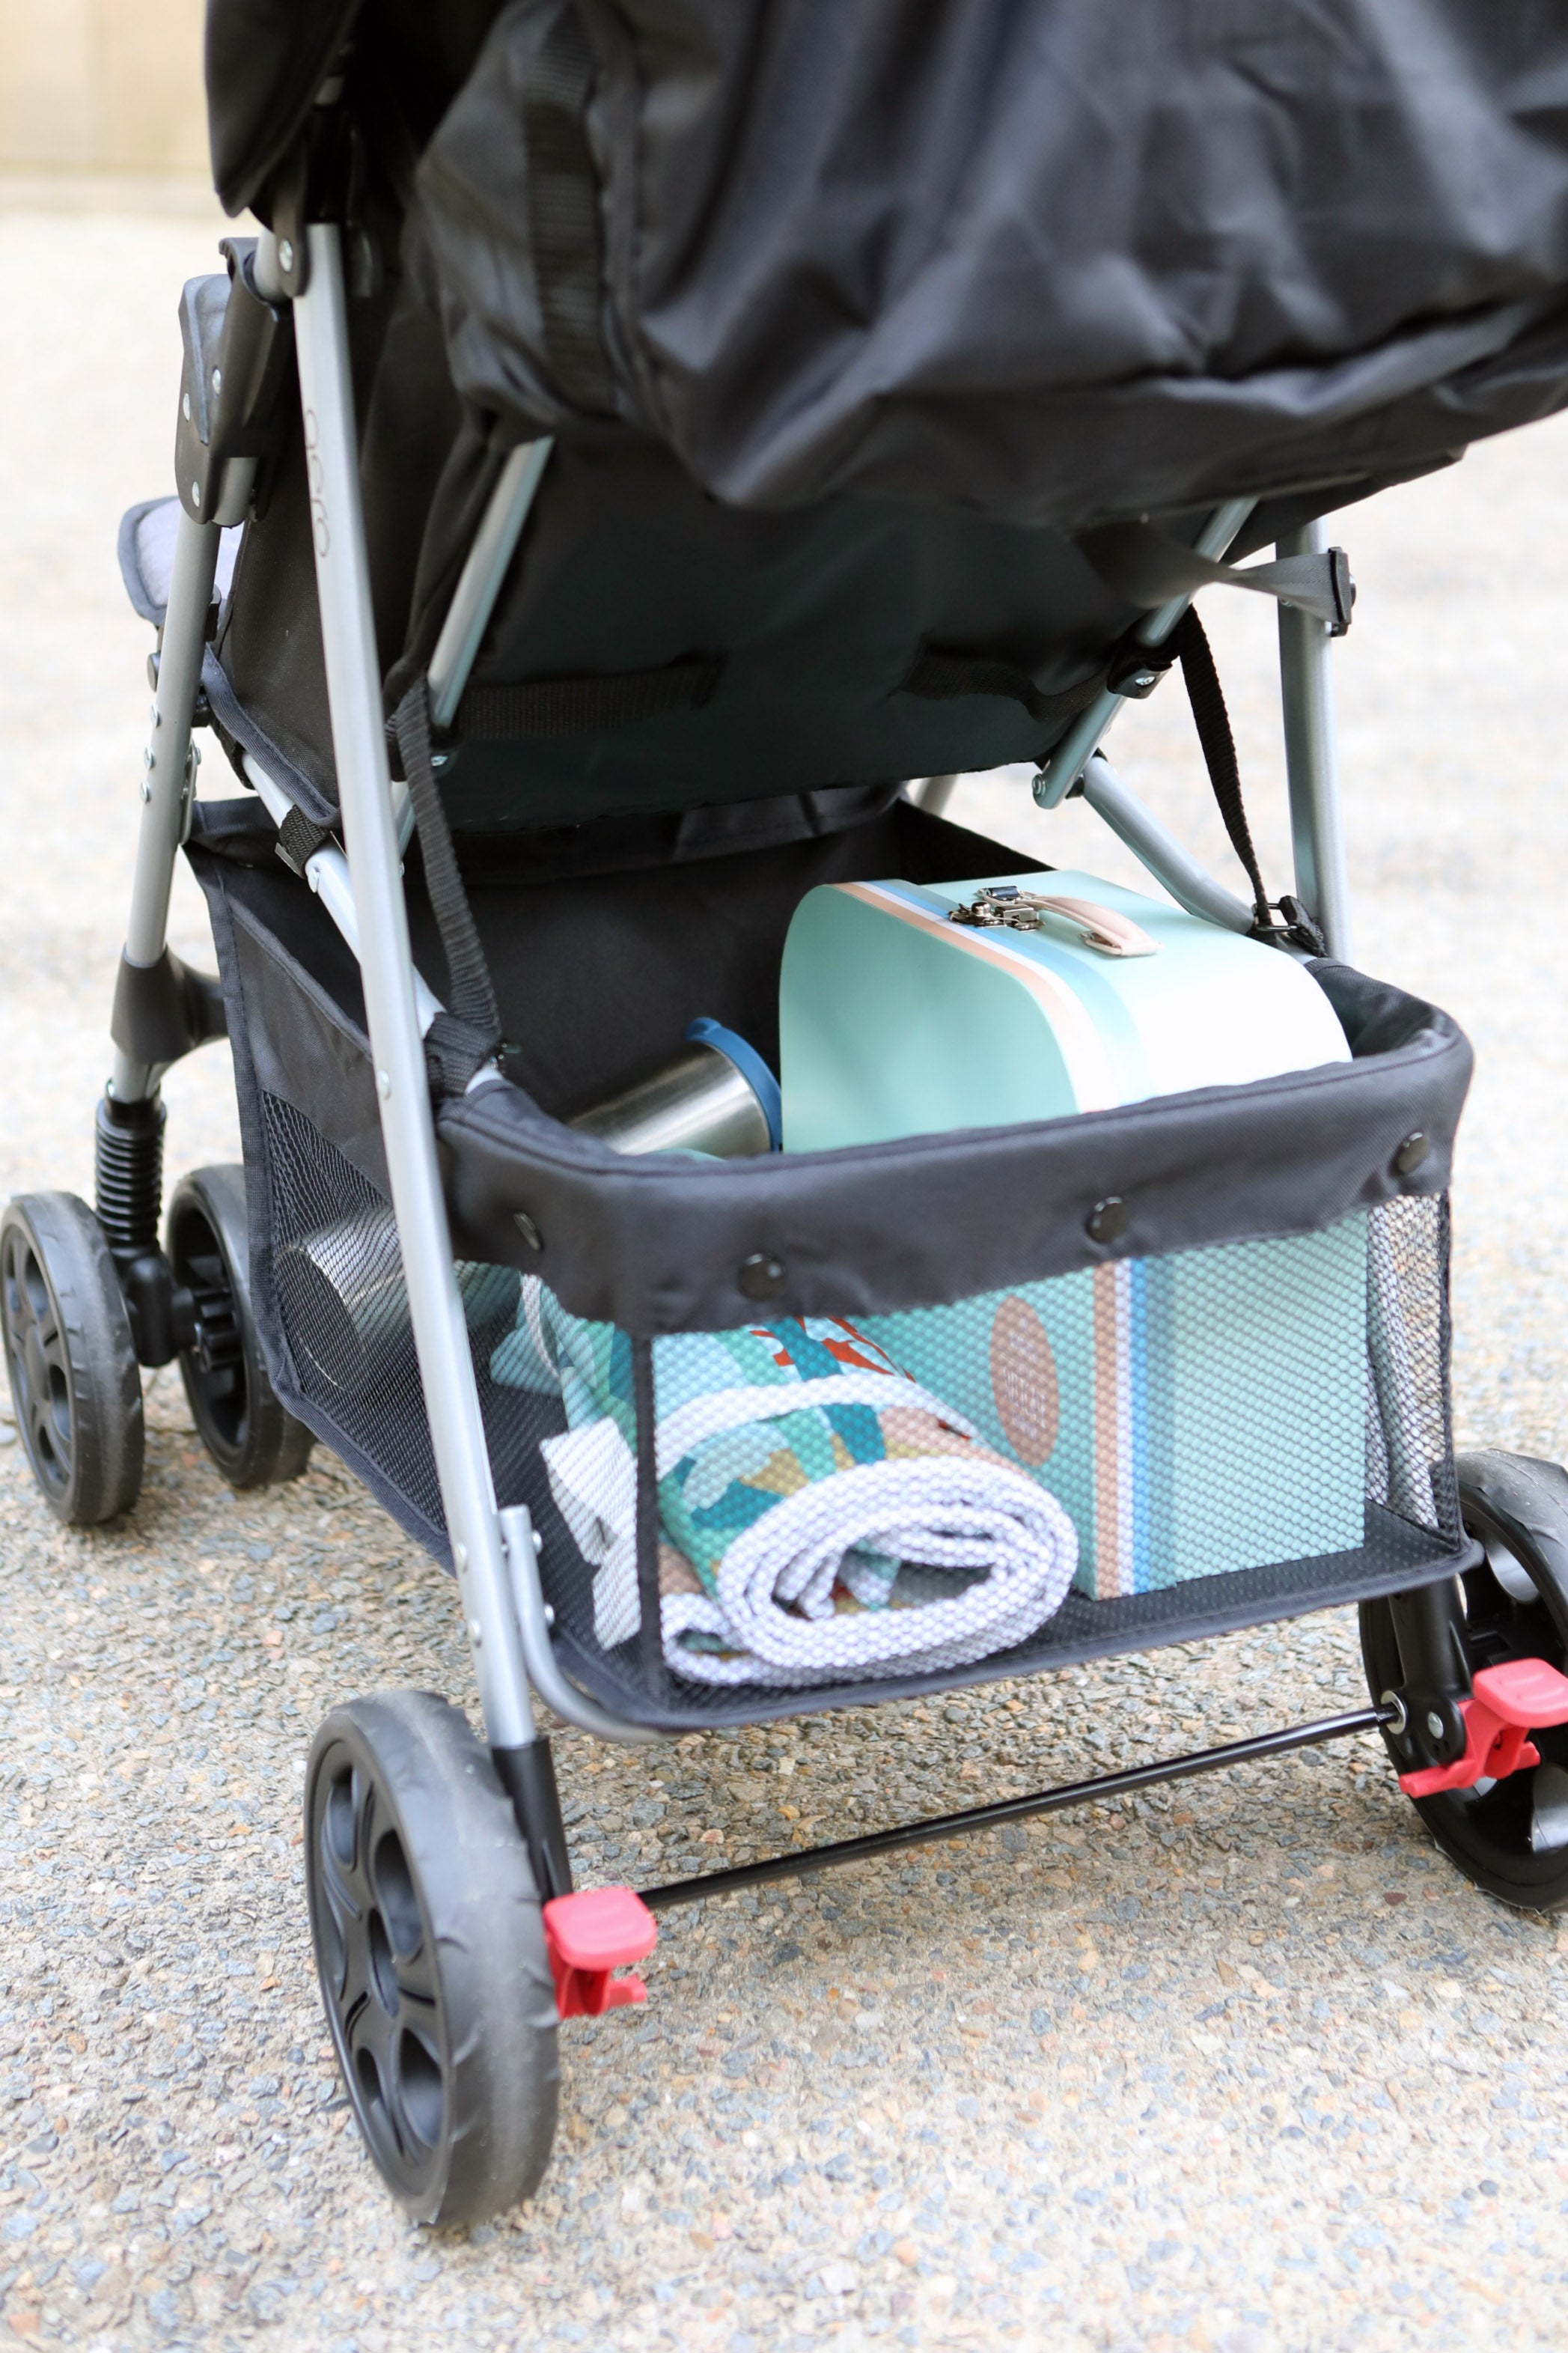 The wonderful little suitcase company presents educational toy suitcases with a cotton playmat that support your child's development. Learining while playing everywhere you go. Fits perfectly into the storage basket of a stroller. Designed in Australia.